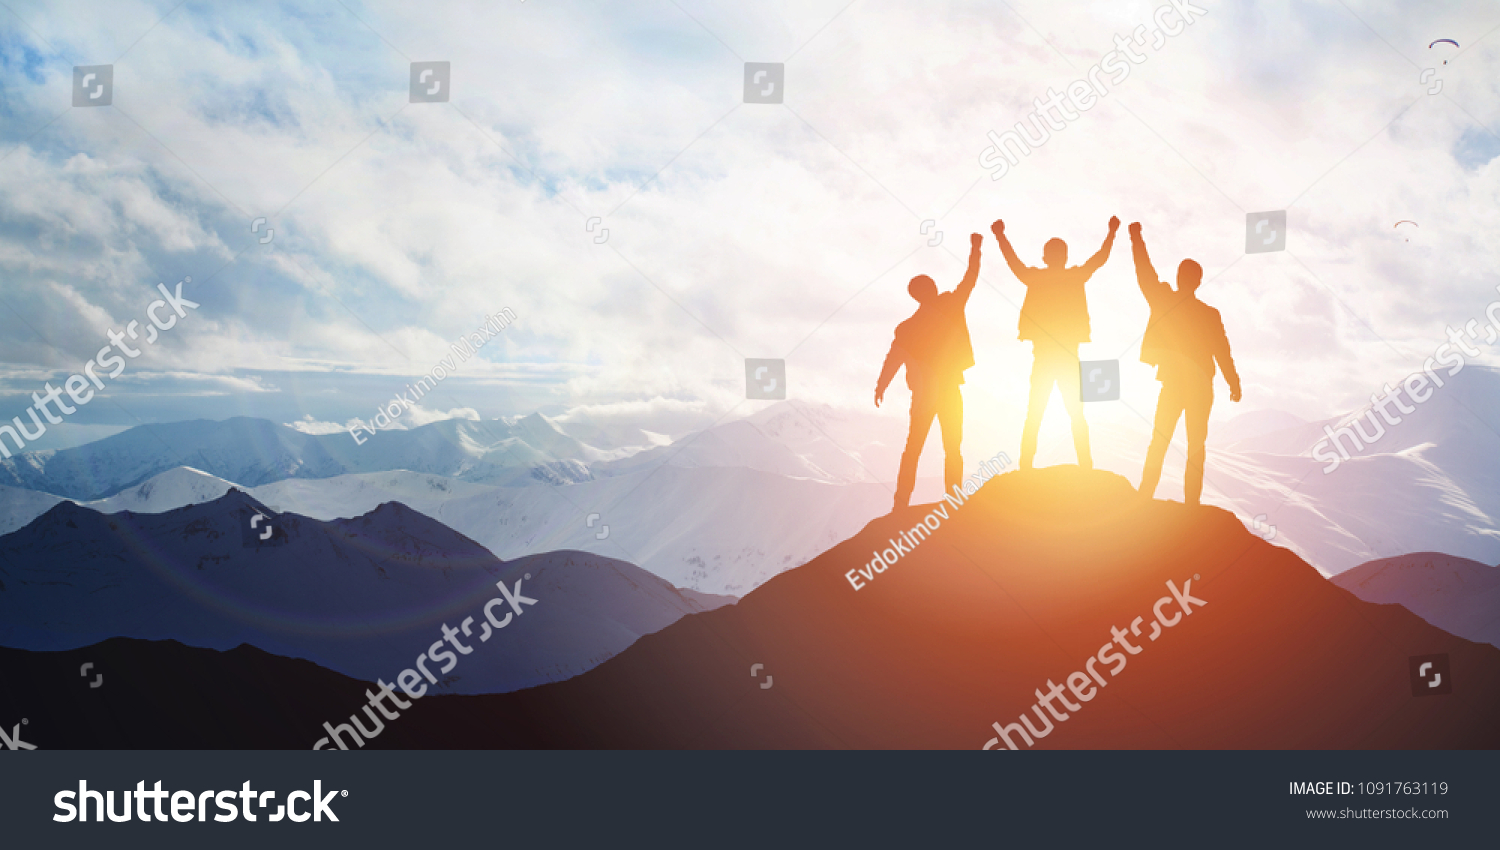 Silhouette of the team on the mountain. Leadership Concept #1091763119